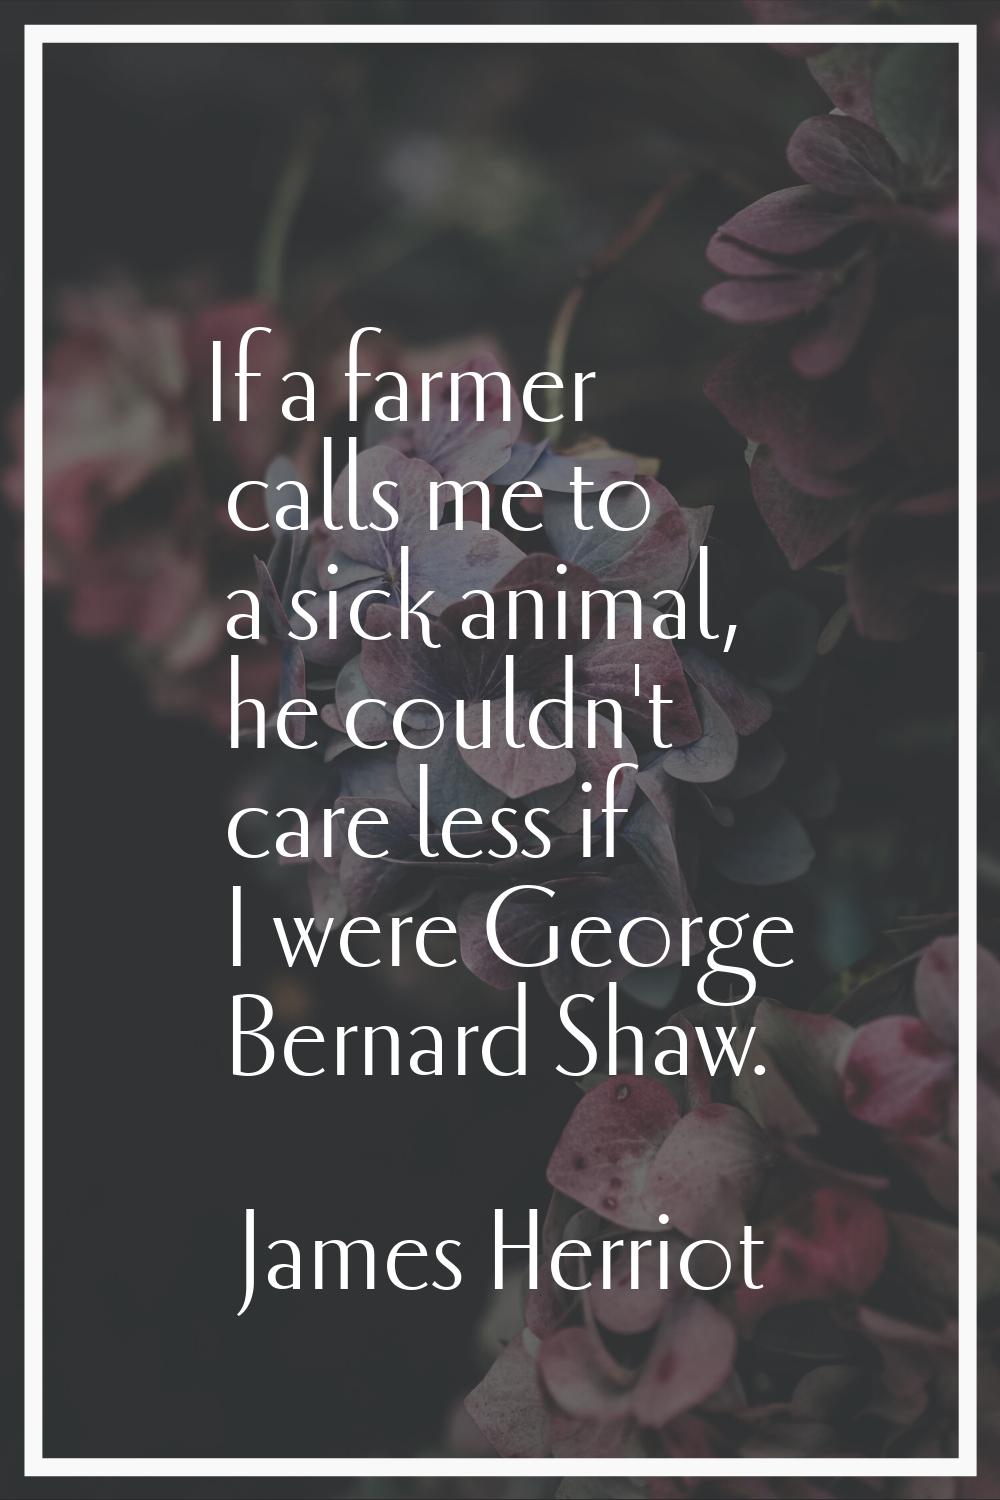 If a farmer calls me to a sick animal, he couldn't care less if I were George Bernard Shaw.